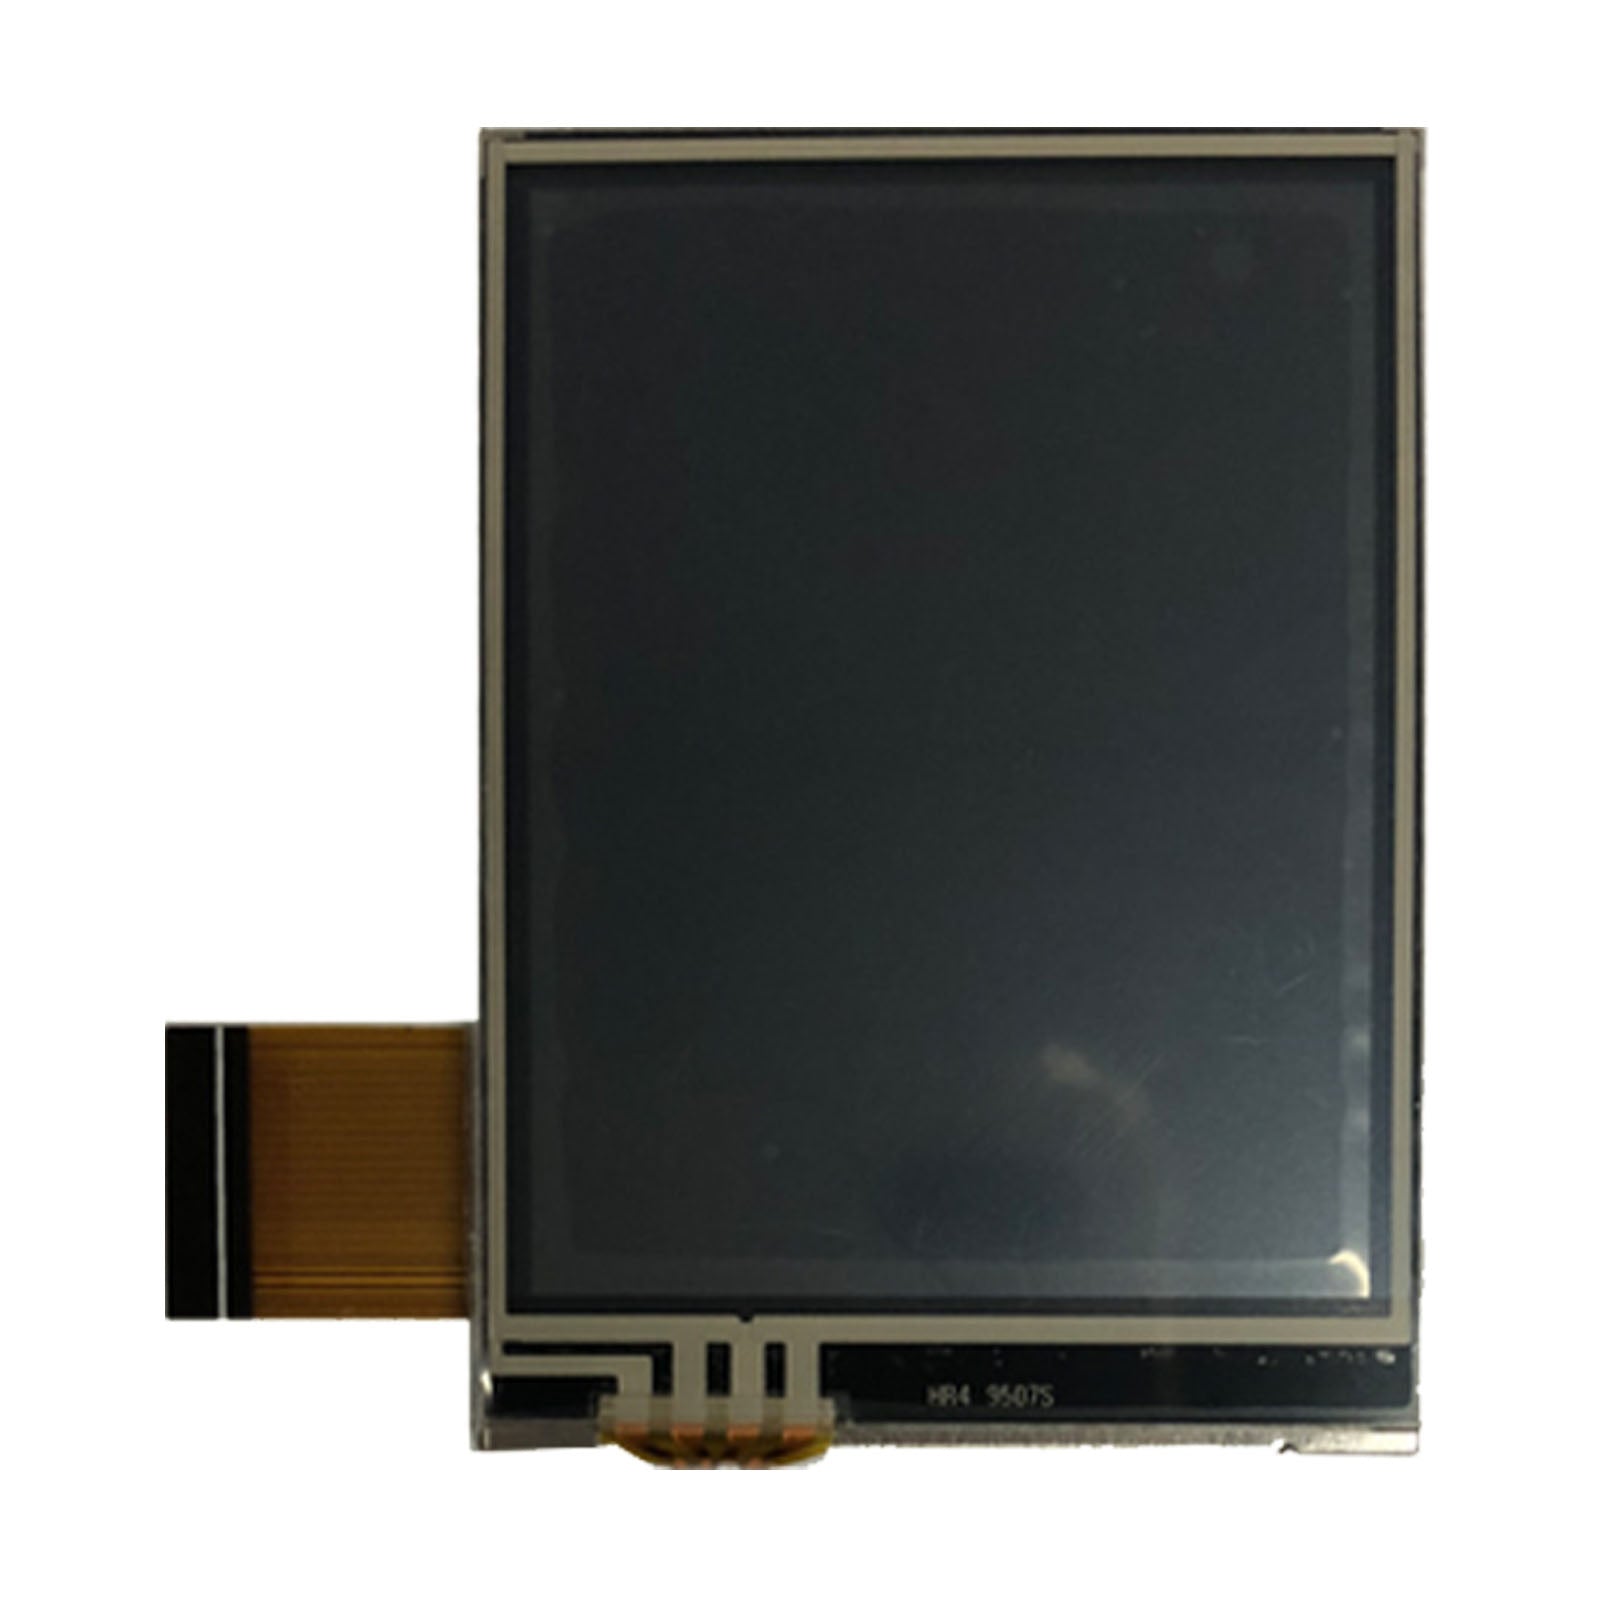 2.4 inch Transflective TFT Display with 240x320 resolution and resistive touch capability, utilizing MCU, SPI, and RGB interfaces